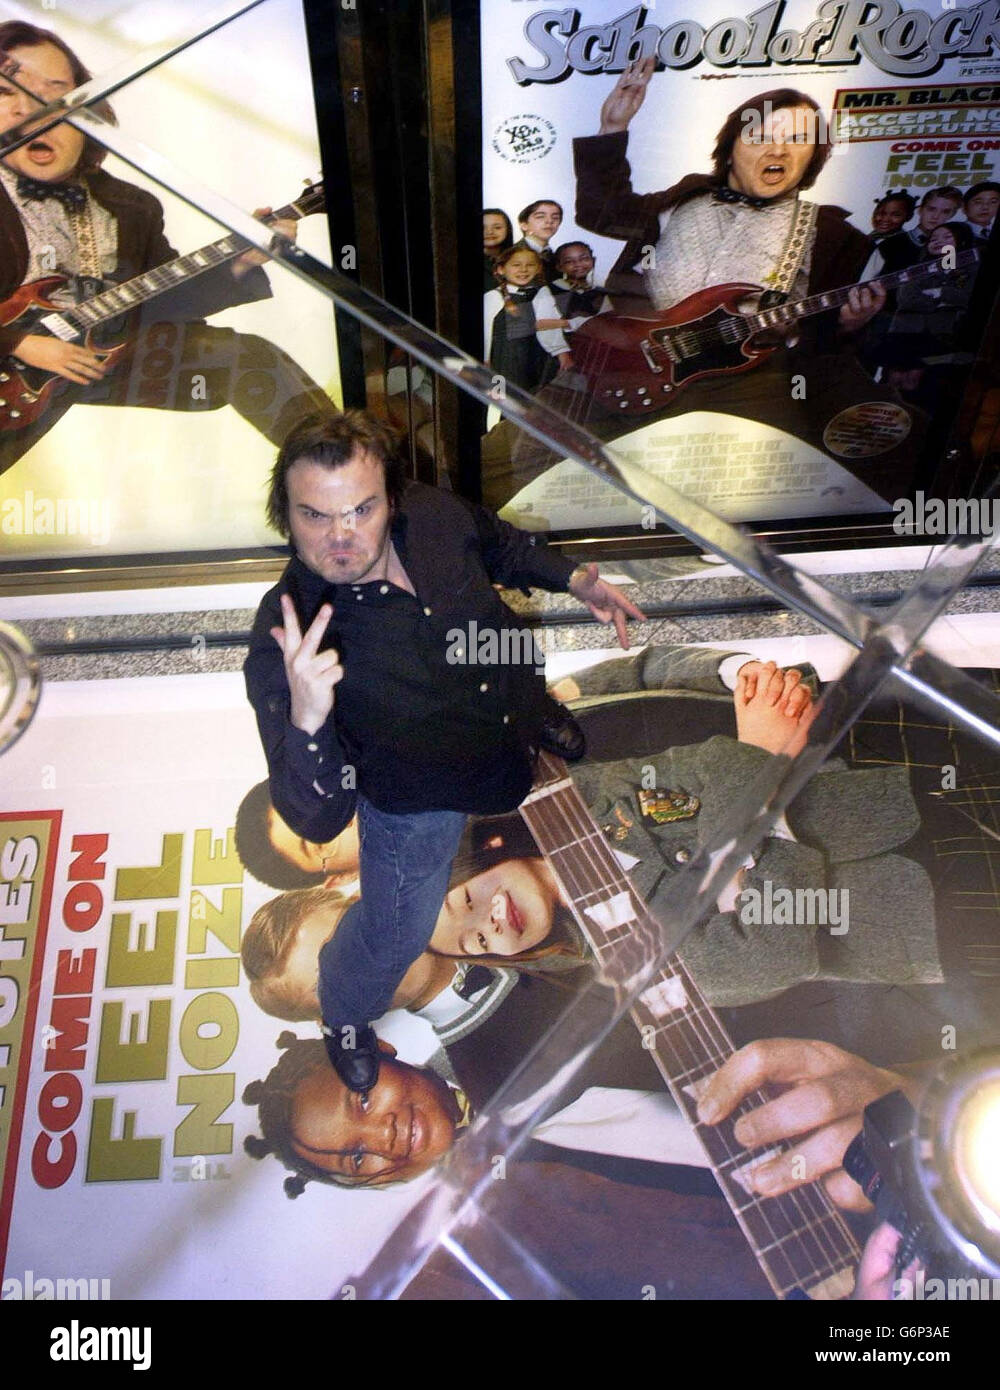 PCheng Photography: Movies: Jack Black Channels His Inner Teenage